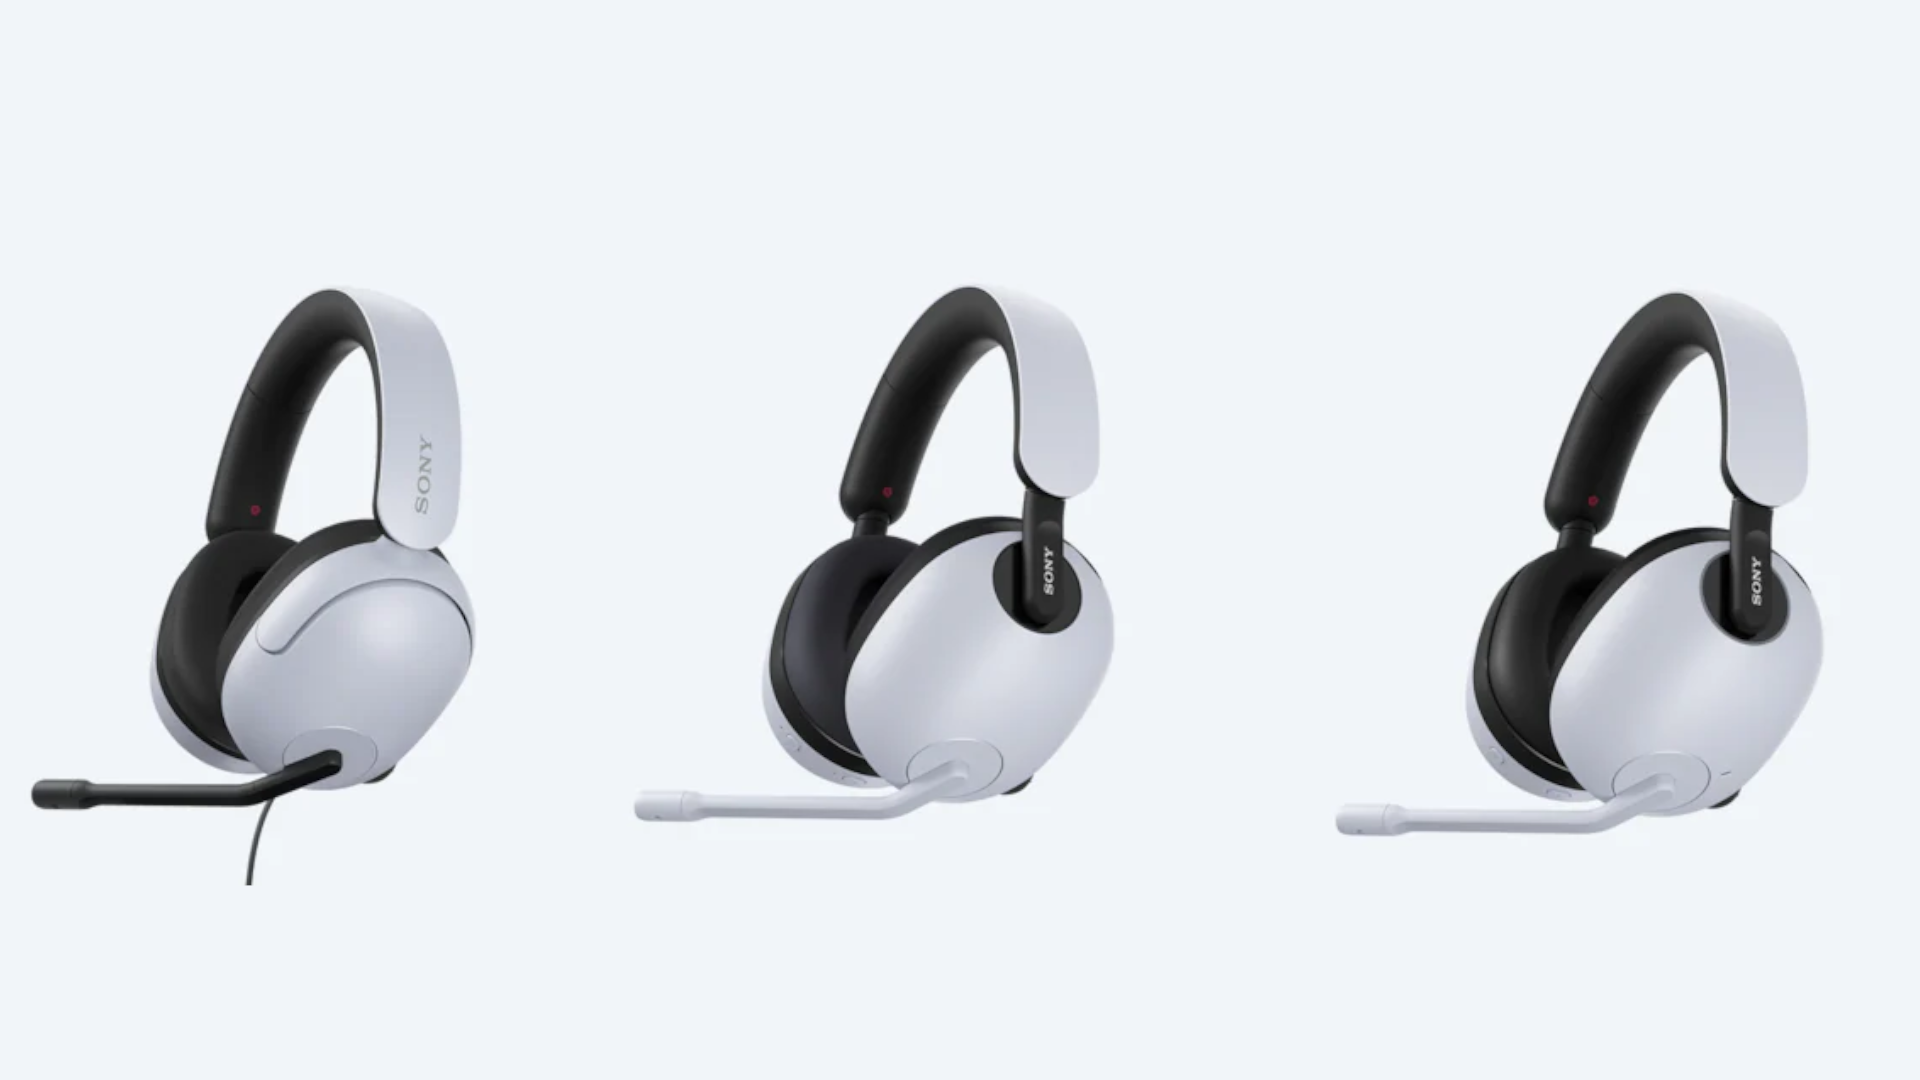 Product shot of three white headsets, one wire, two wireless, on white background